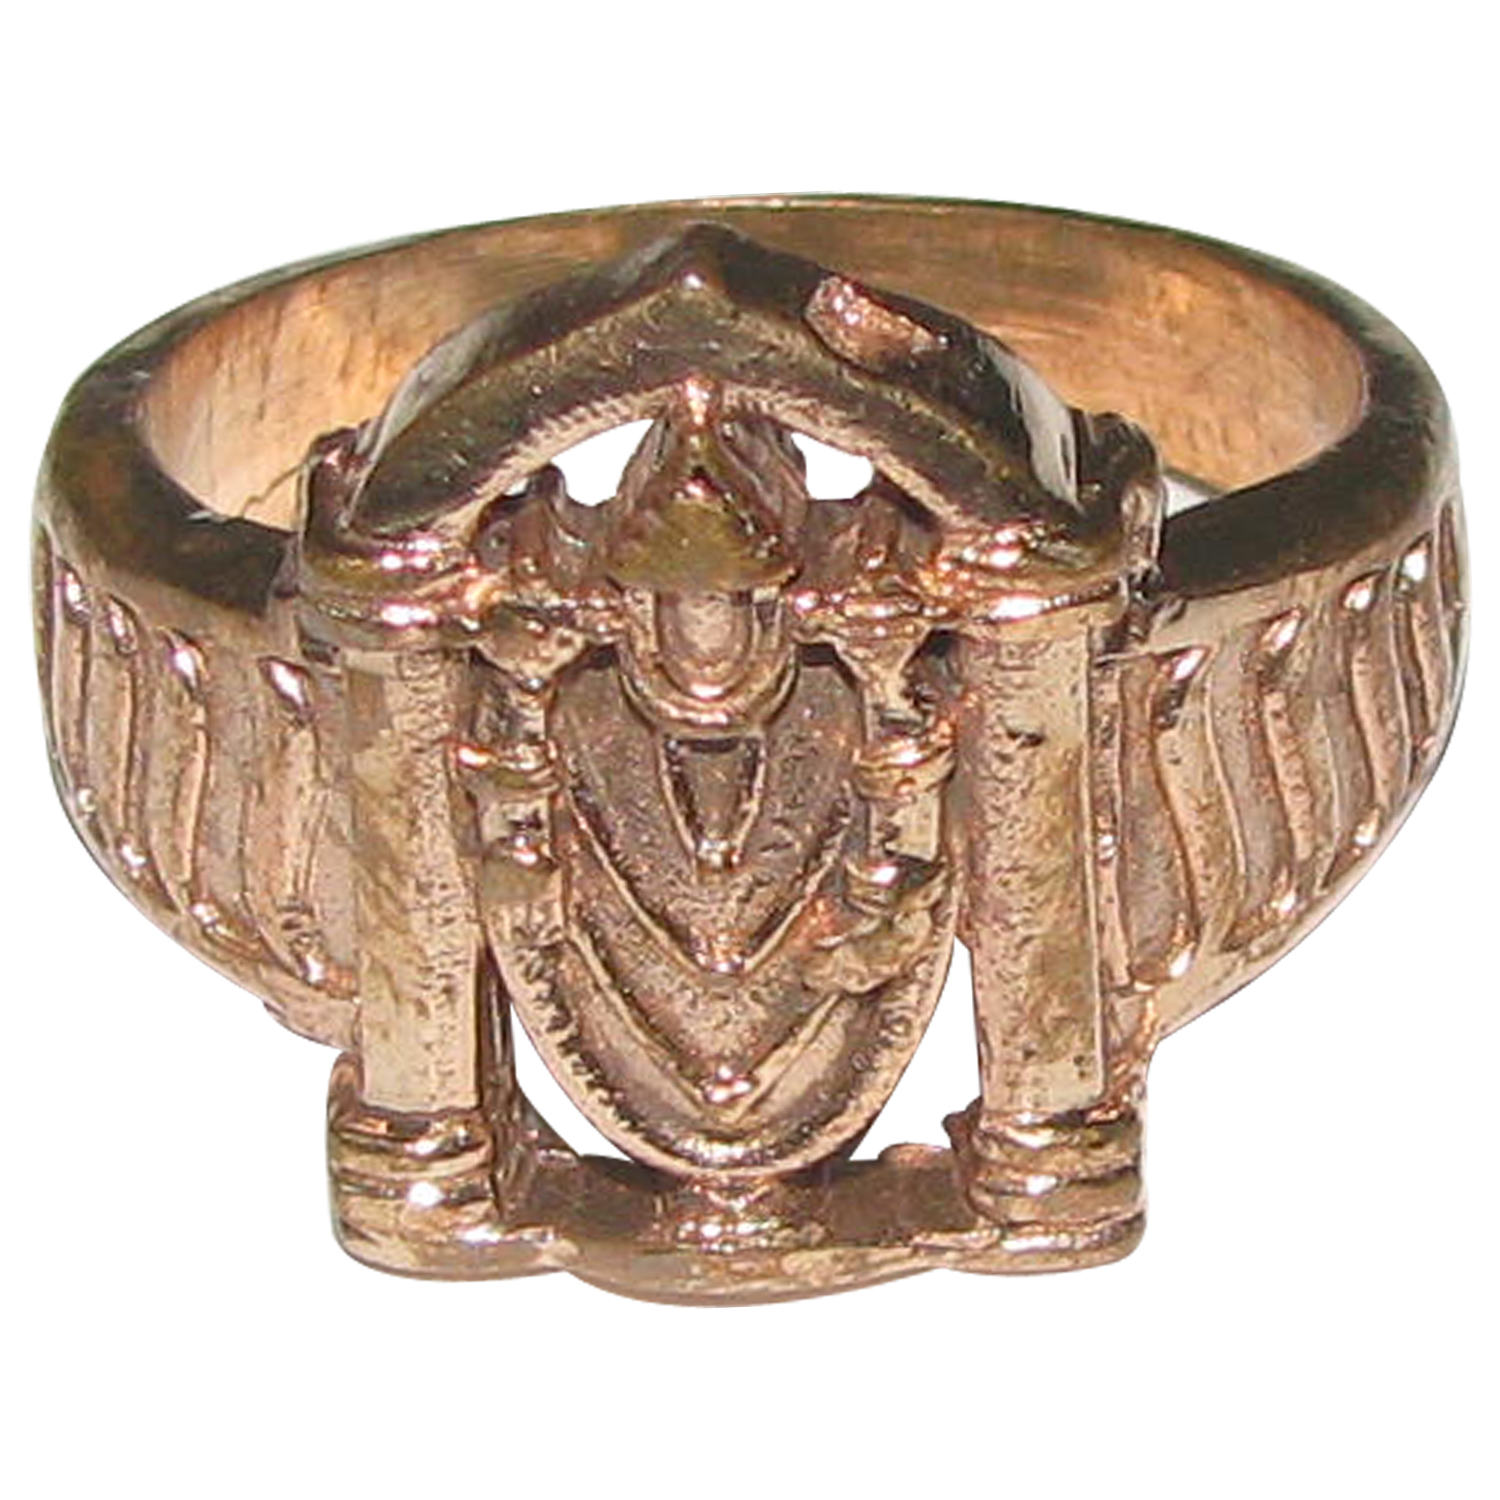 White Buffalo Mixed Metal 5-Stack Ring size US 8 1/2 – Drugstore Cowgirl